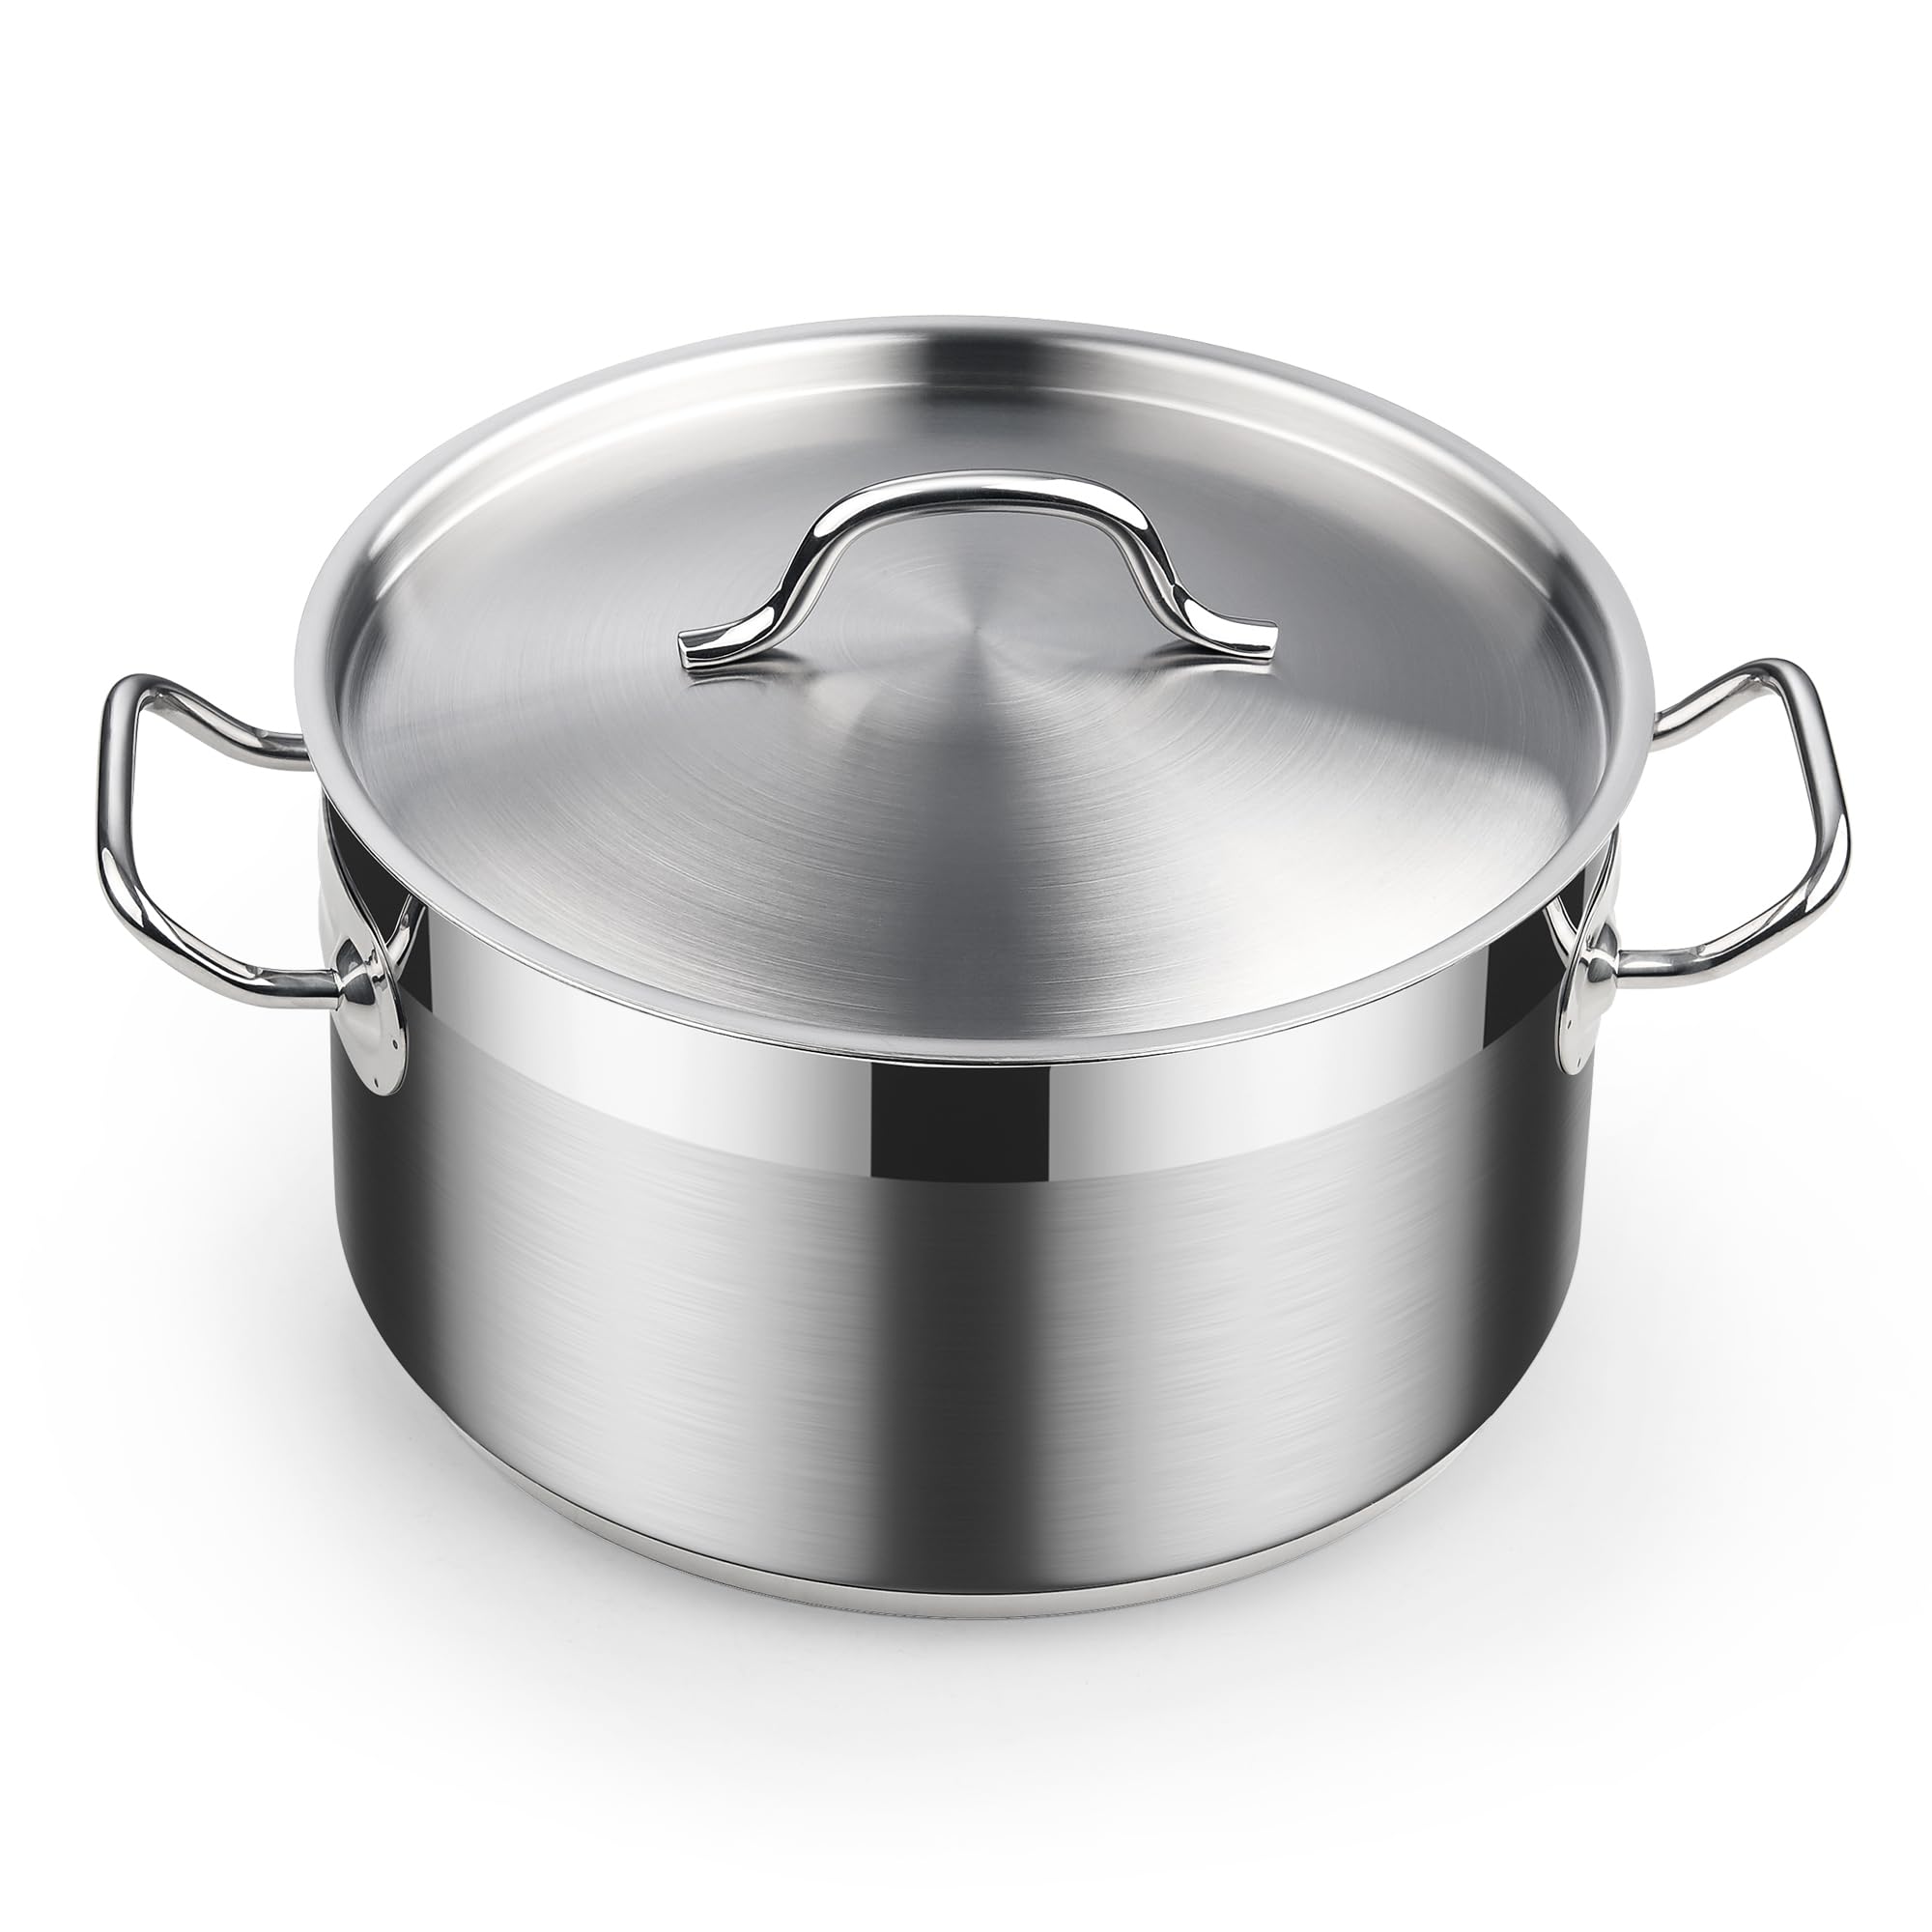 Cooks Standard Dutch Oven Casserole Pot with Lid, 6-Quart Professional 18/10 Stainless Steel Stockpot, Compatible with All Stovetops, Silver